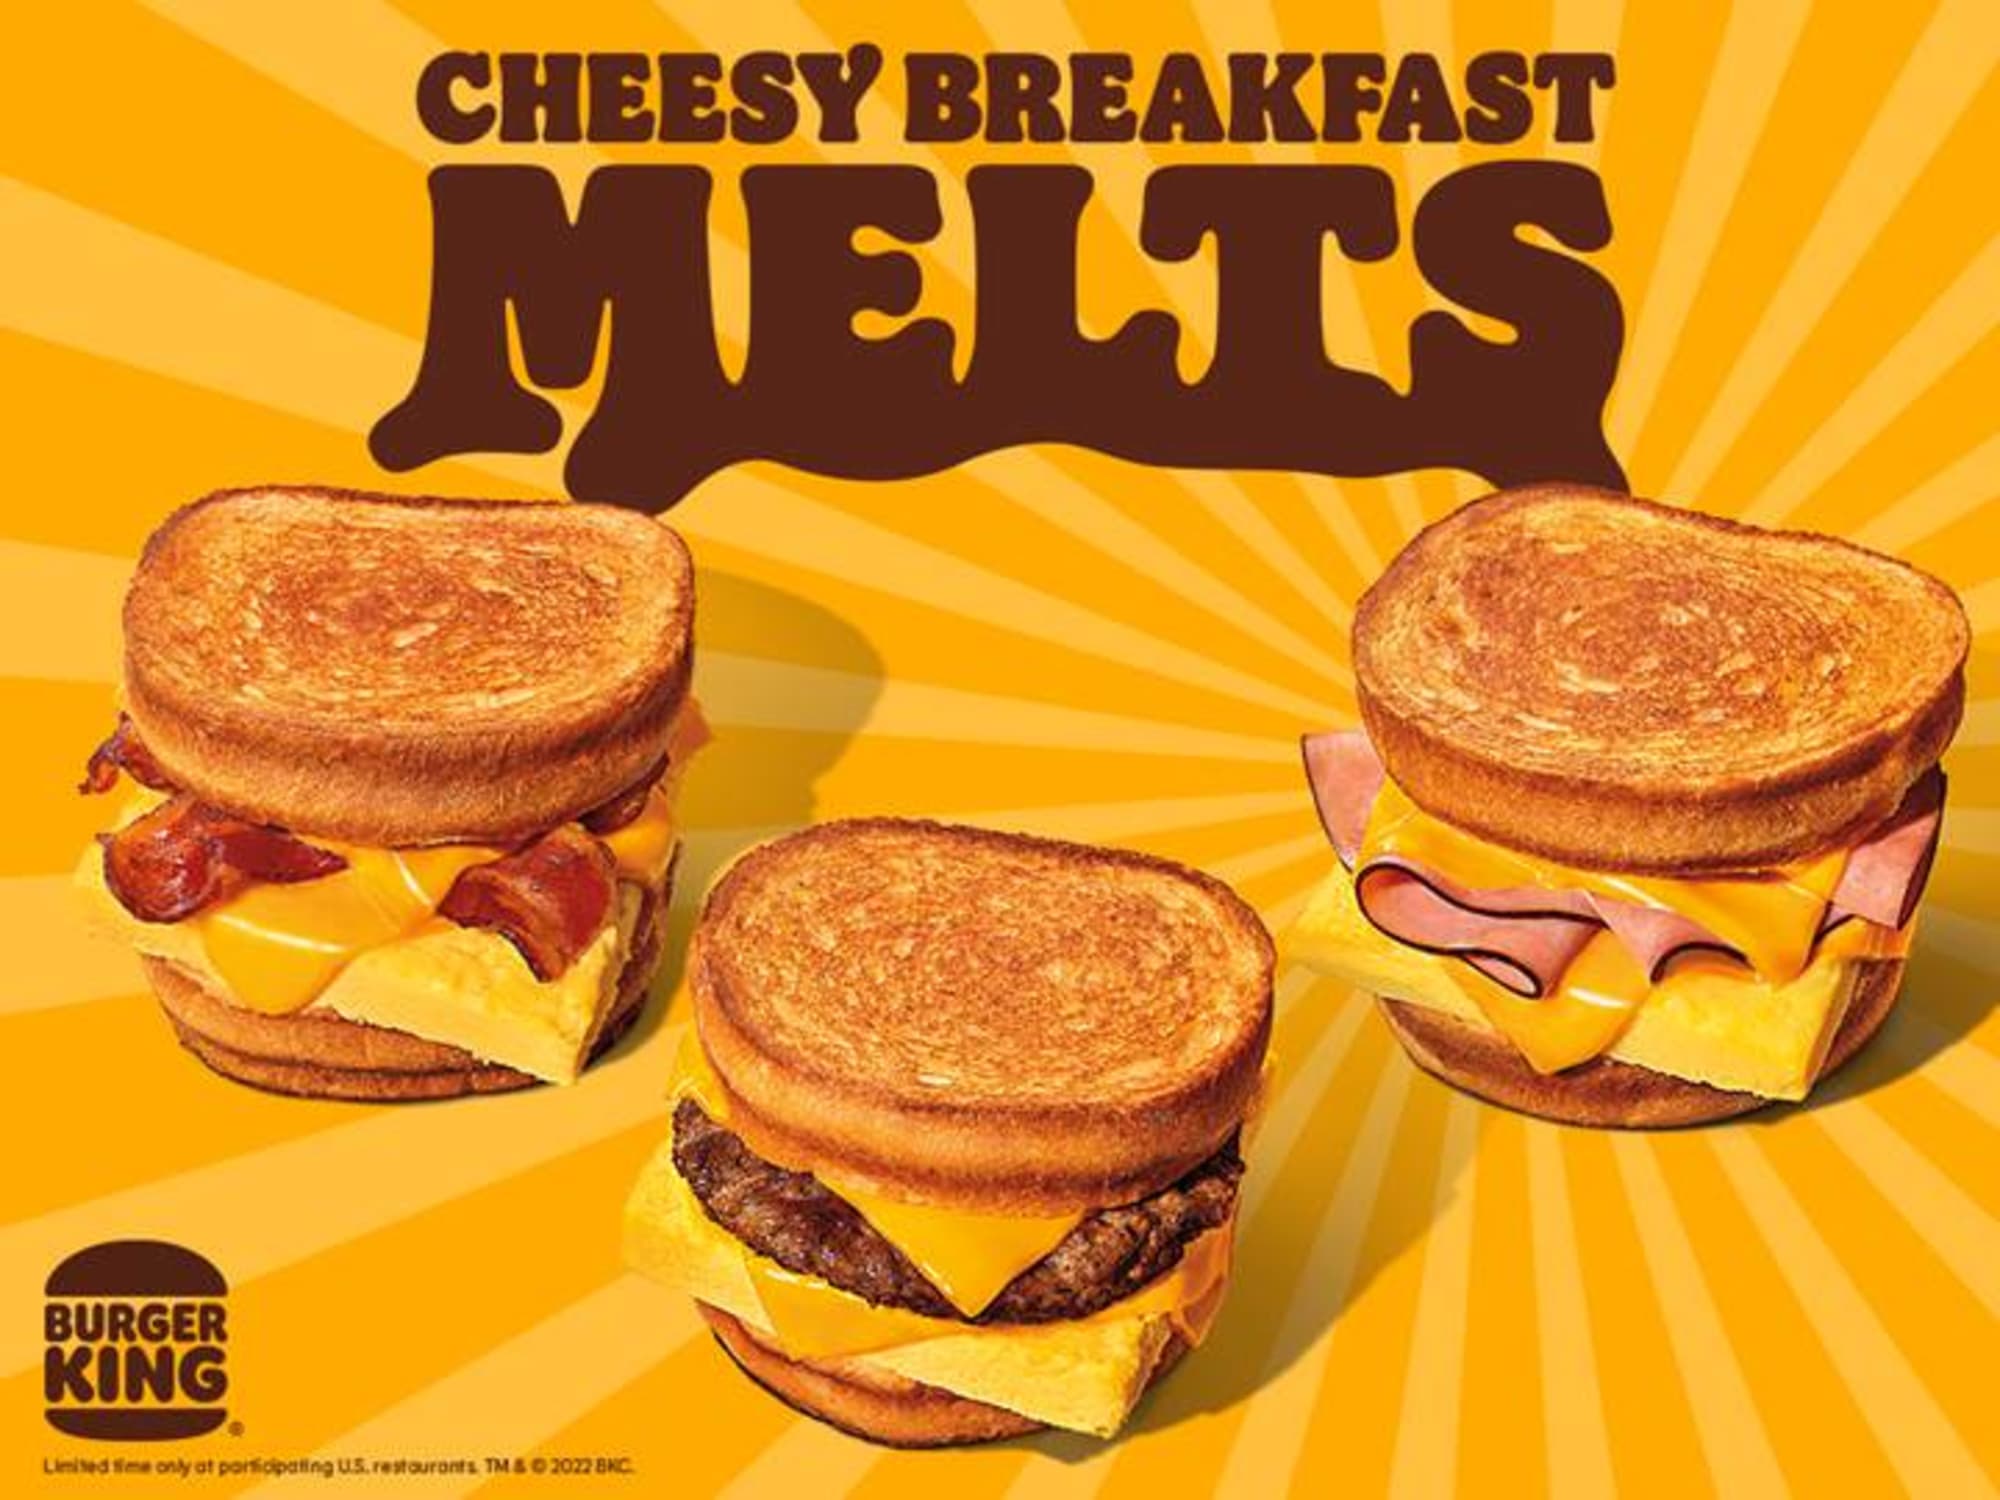 Actively Masculinity suggest Burger King Cheesy Breakfast Melts pull people out of bed